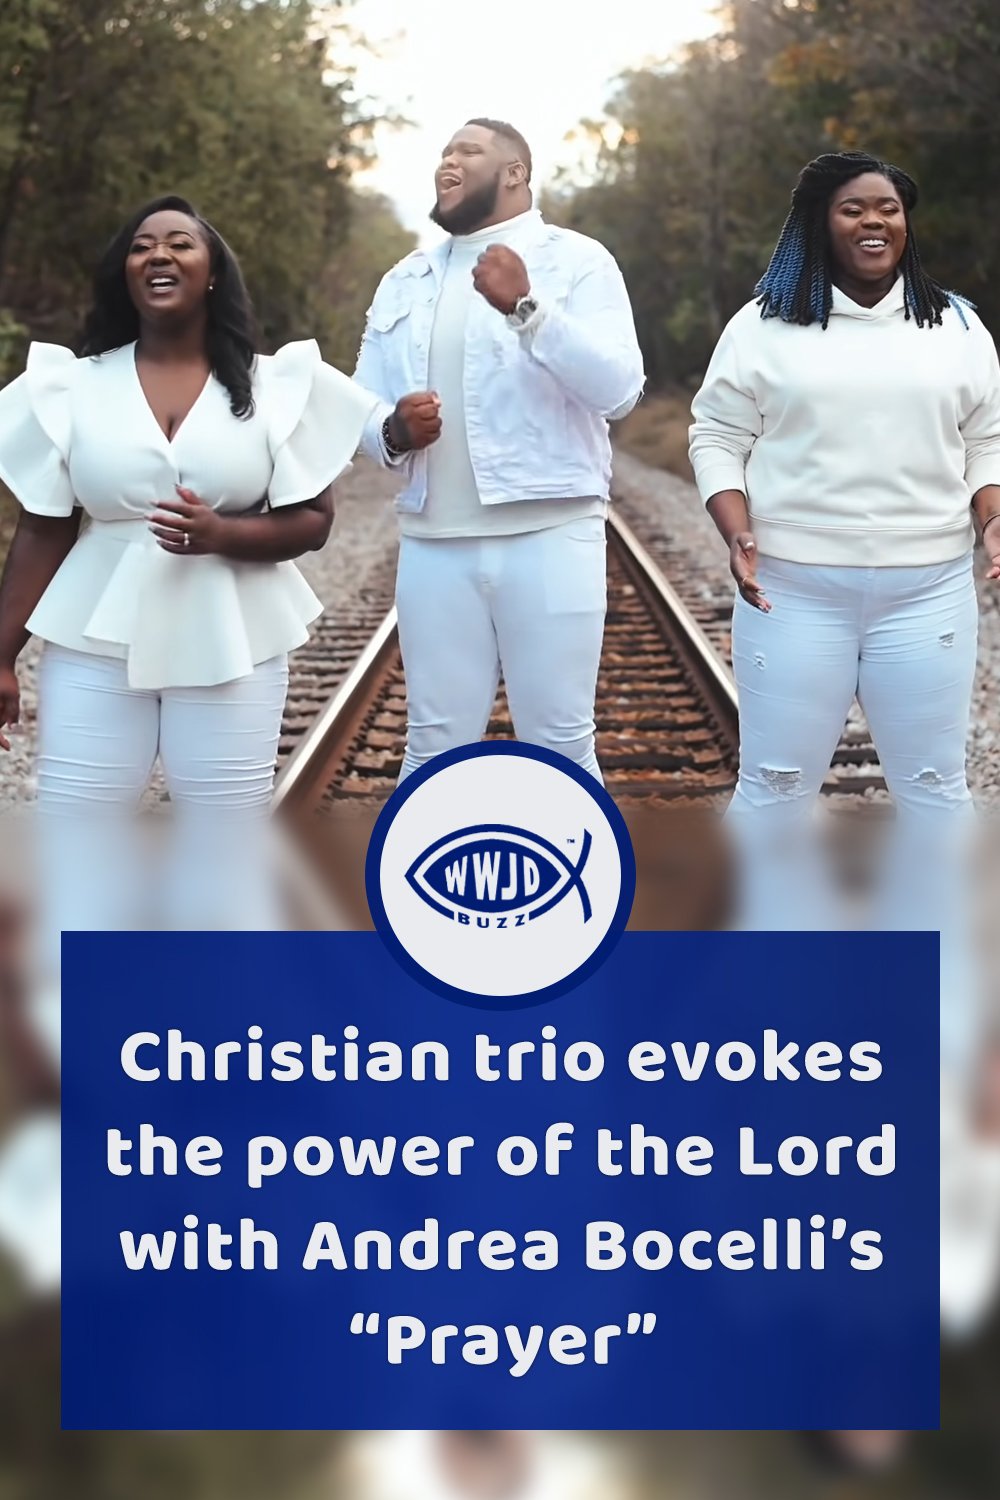 Christian trio evokes the power of the Lord with Andrea Bocelli’s “Prayer”